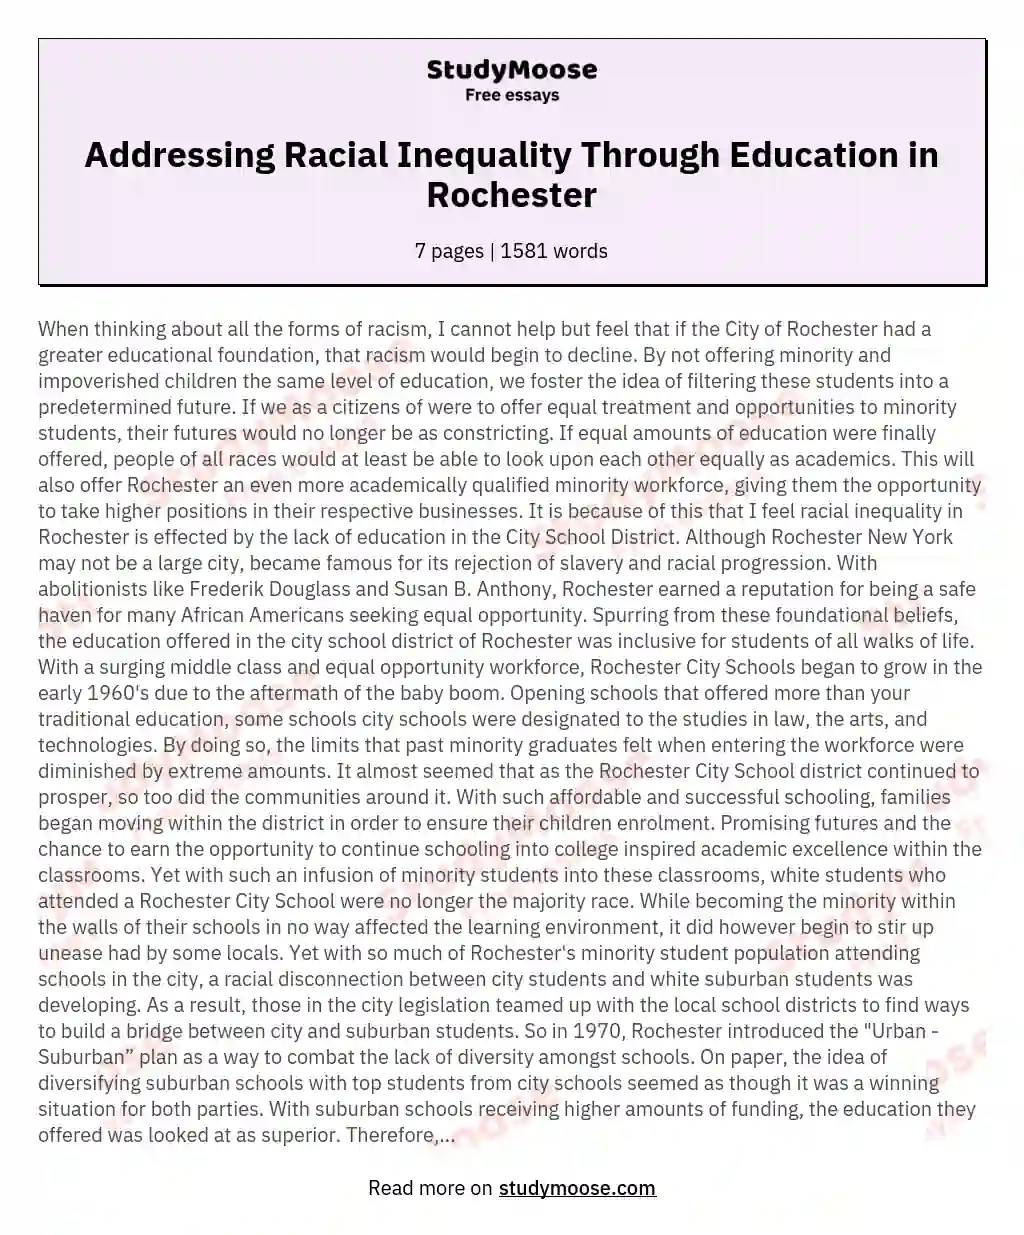 Addressing Racial Inequality Through Education in Rochester essay